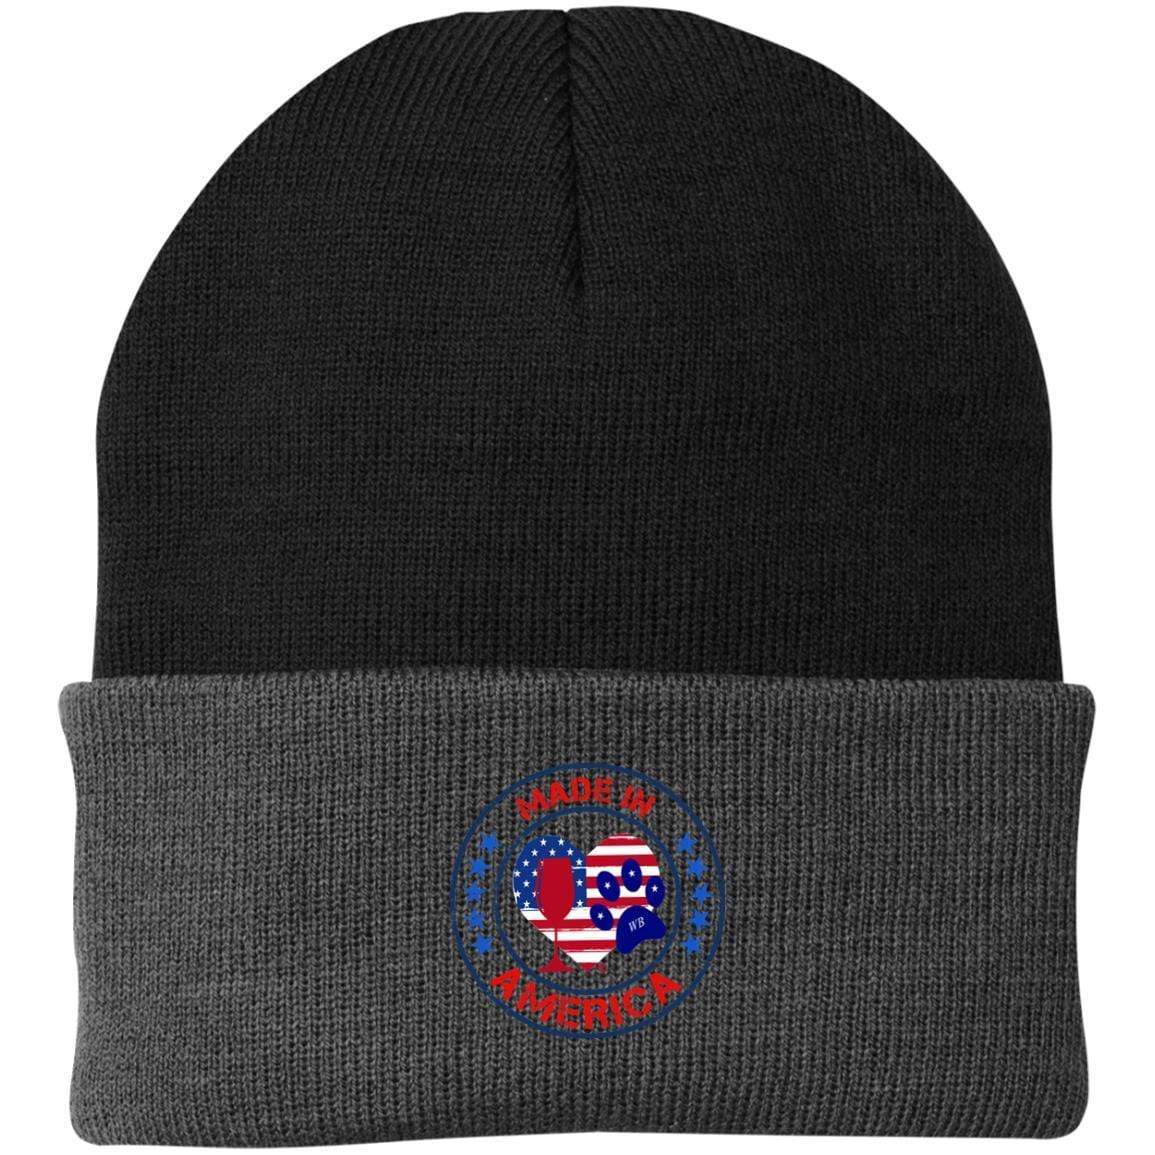 Hats Black/Athletic Oxford / One Size Winey Bitches Co "Made In America" Embroidered Knit Cap WineyBitchesCo